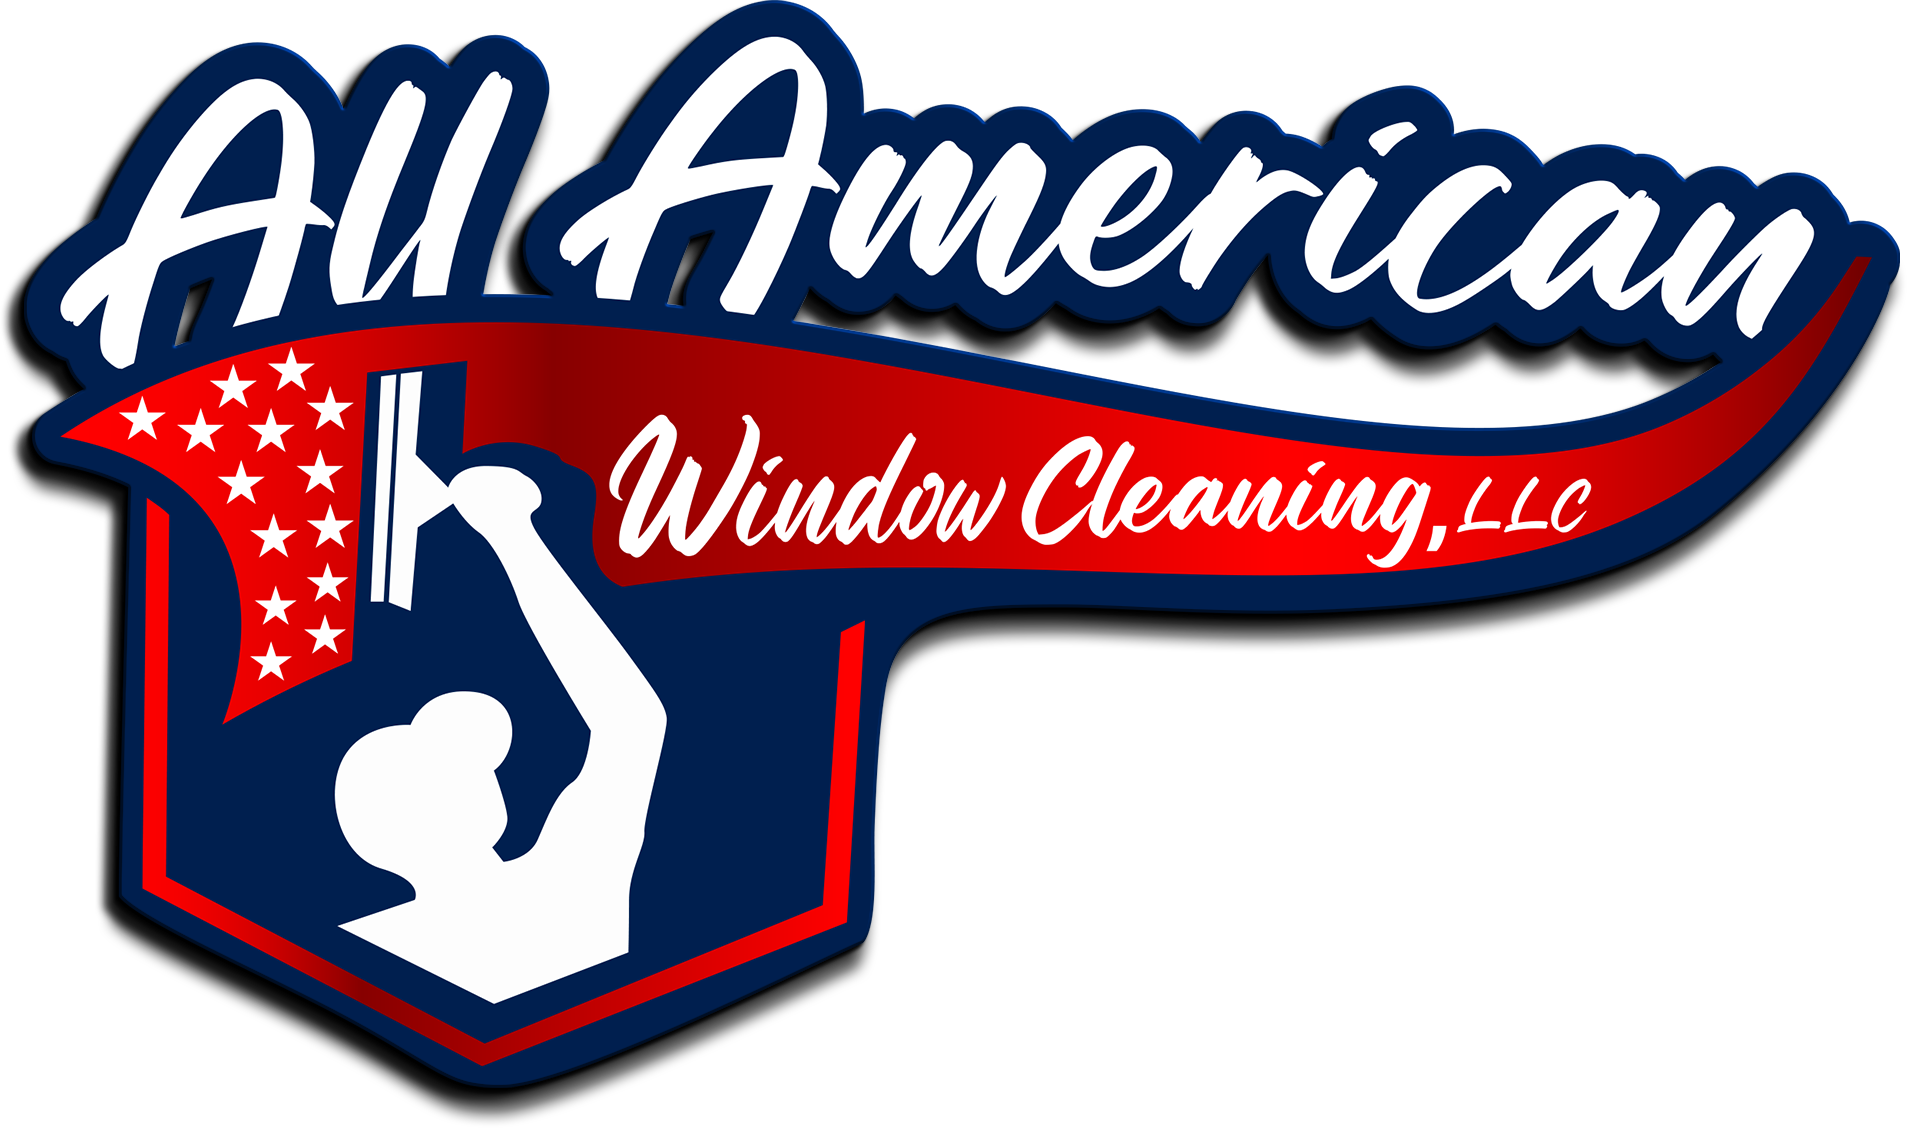 Residential and Commercial Window Cleaning Service